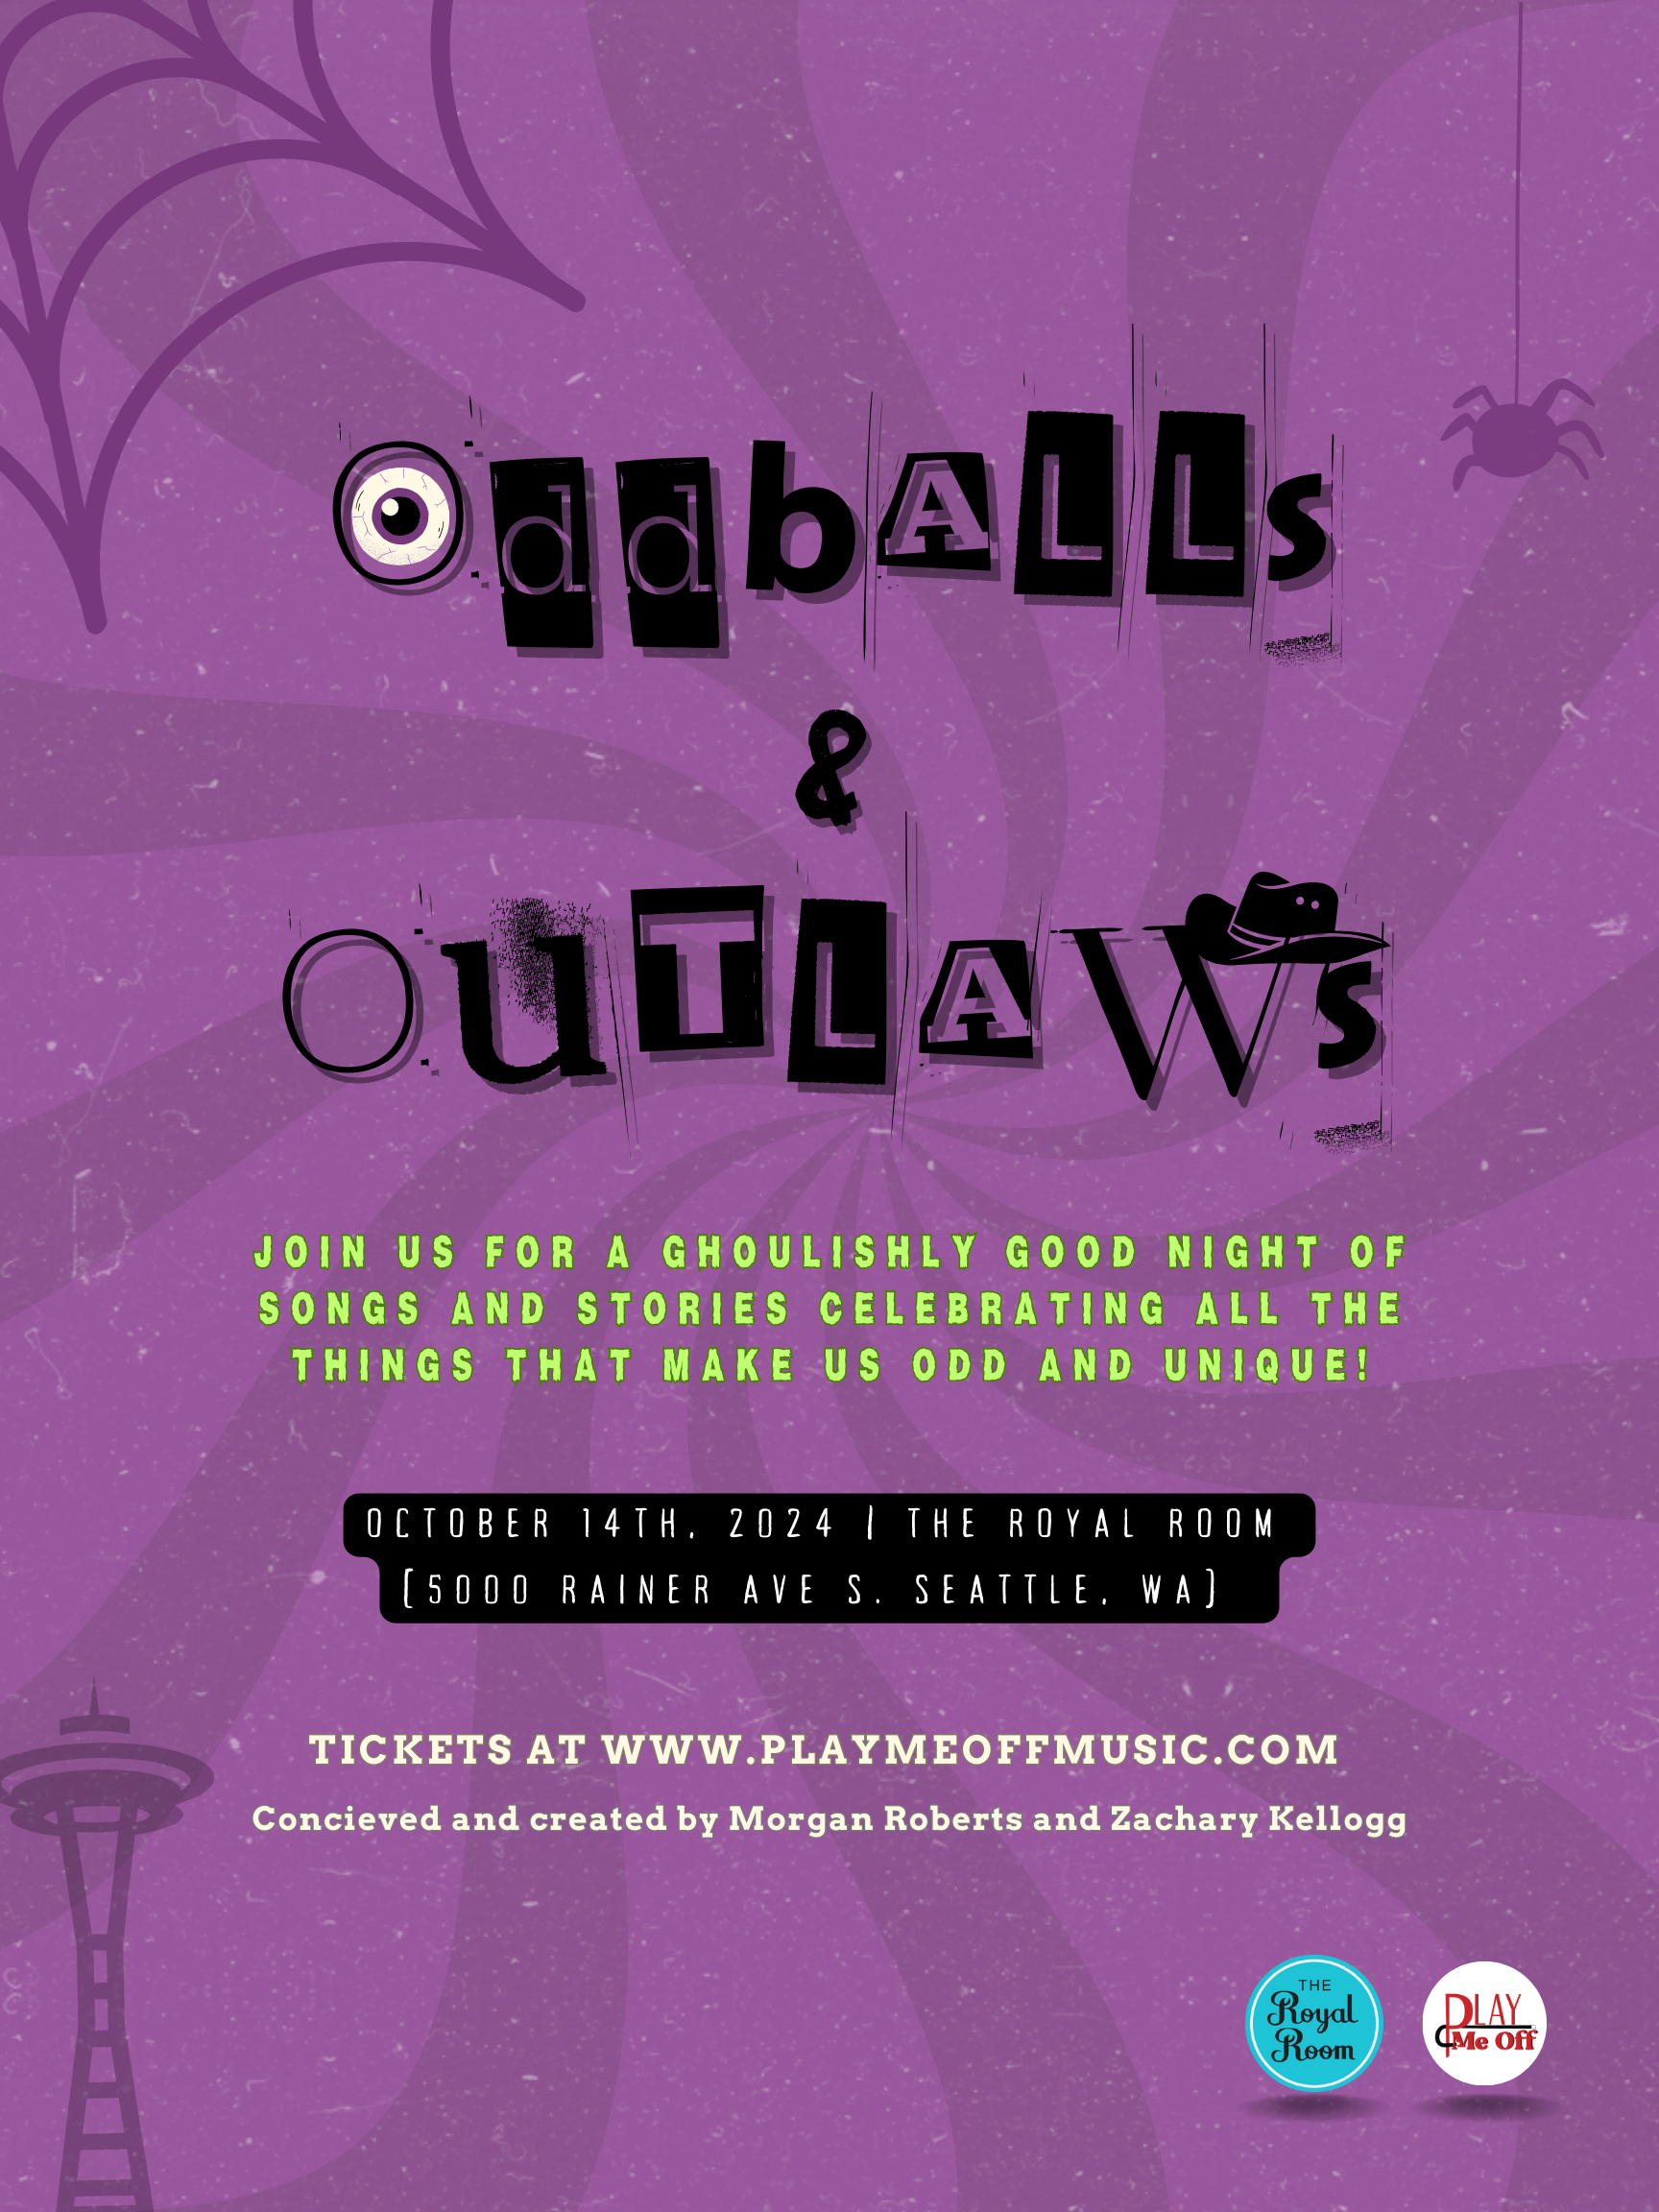 Play Me Off Presents: “Oddballs and Outlaws”